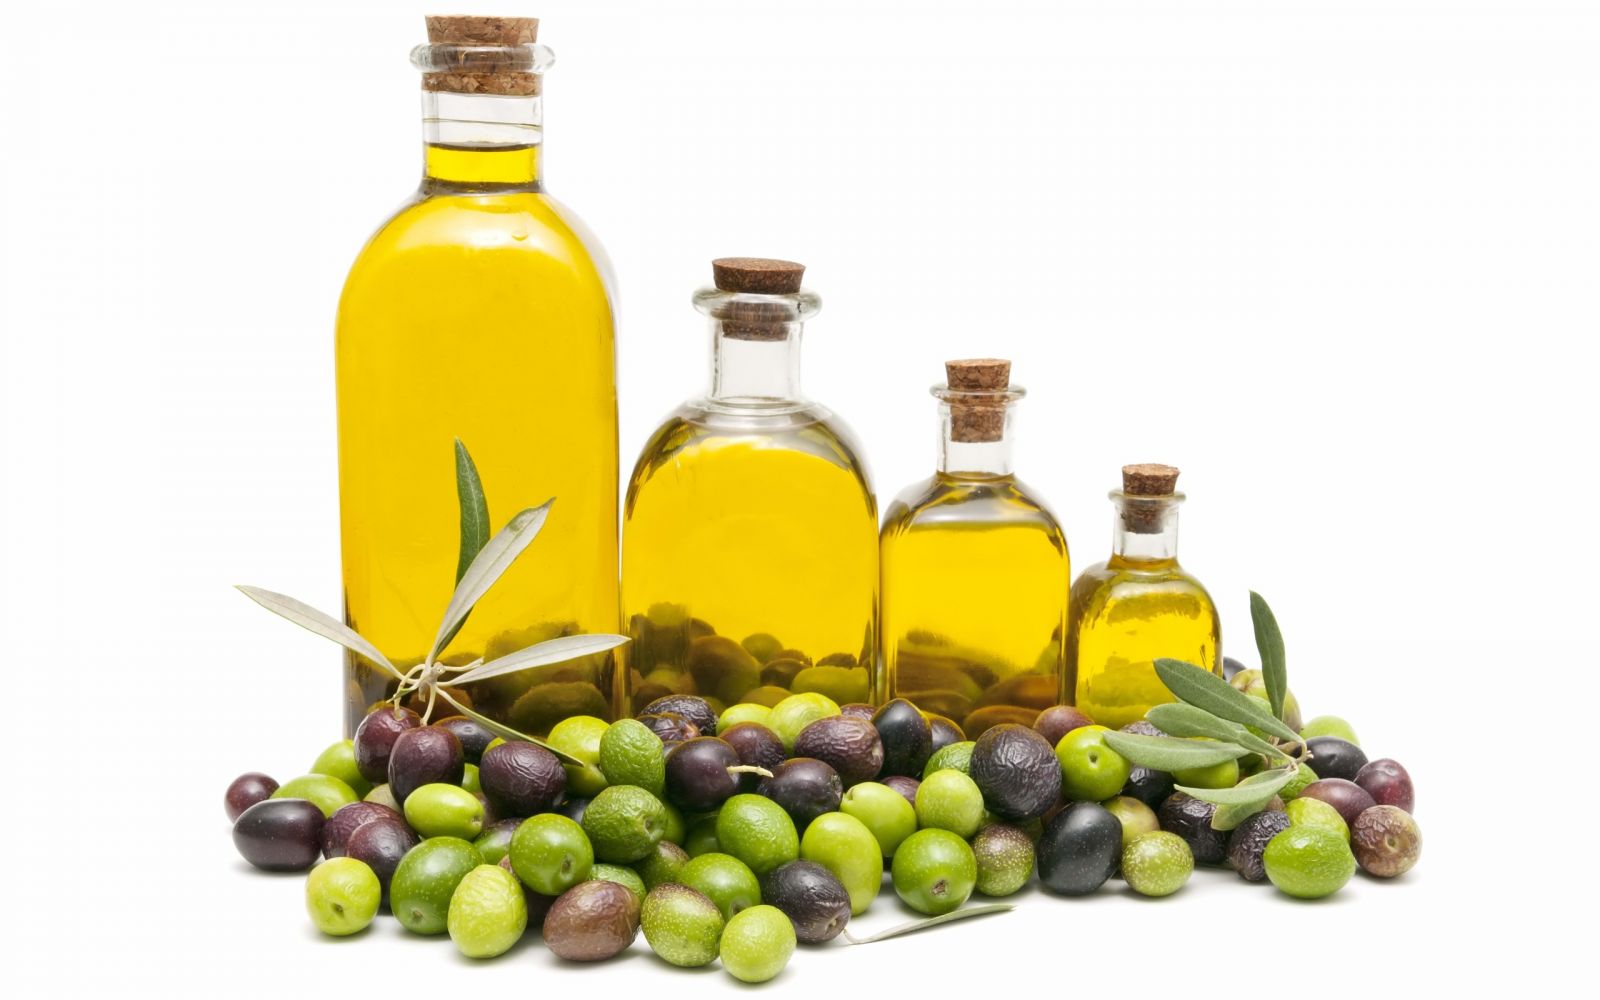 Olive oil is responsible for killing free radicals within the body.